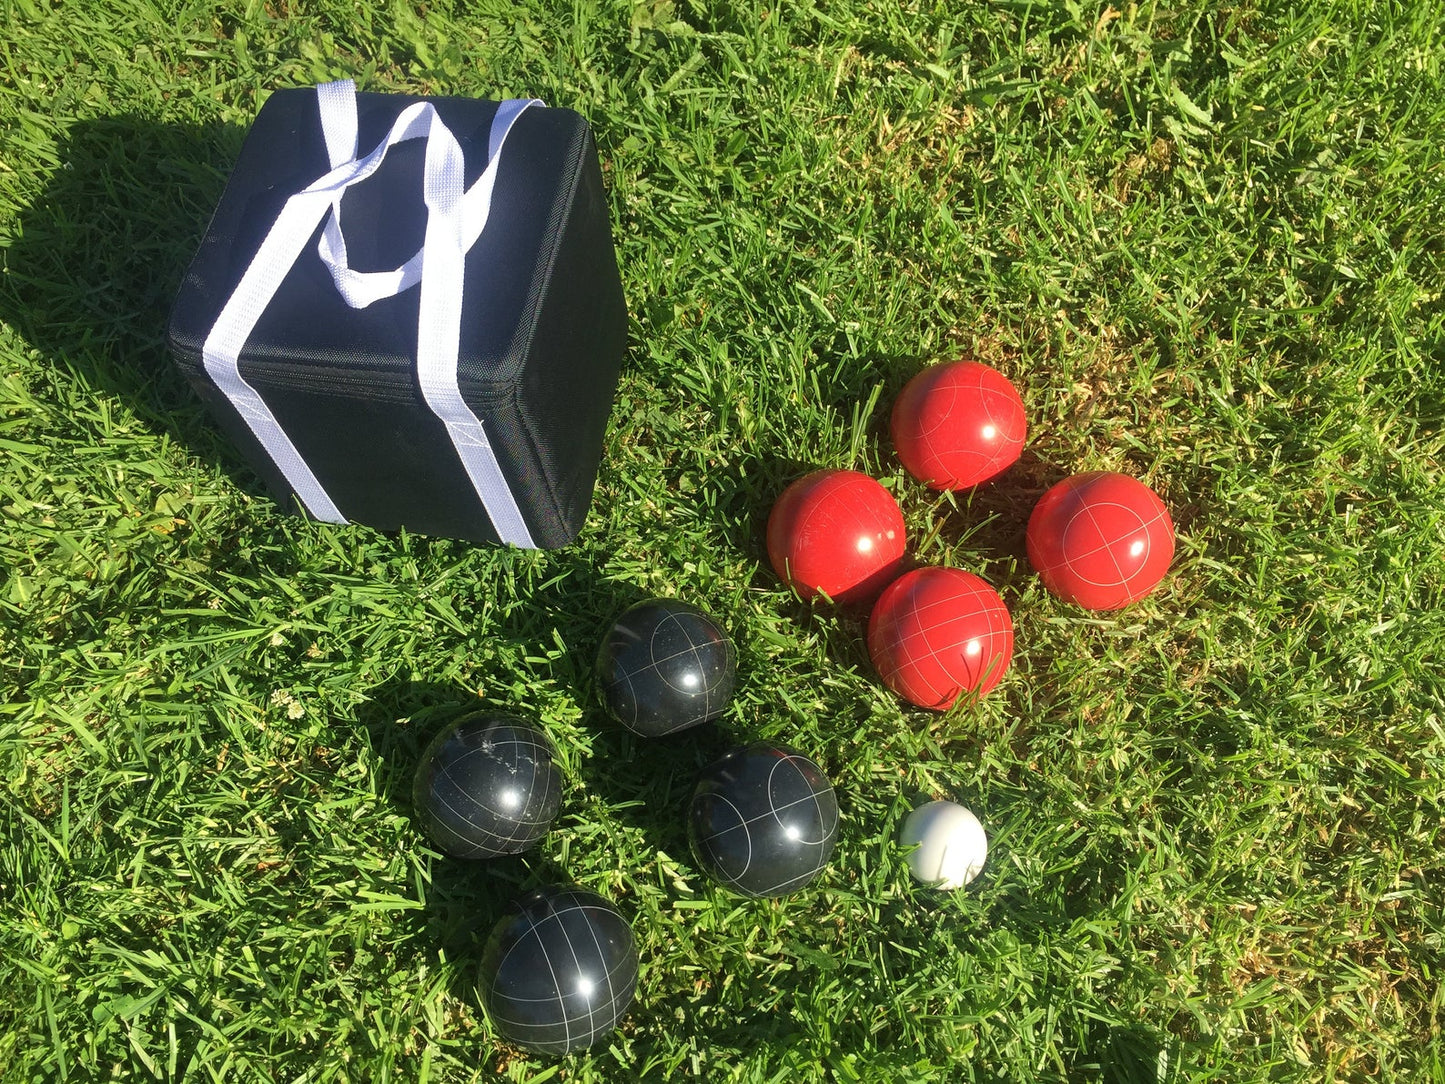 107mm with Black and Red Balls with Black Bag